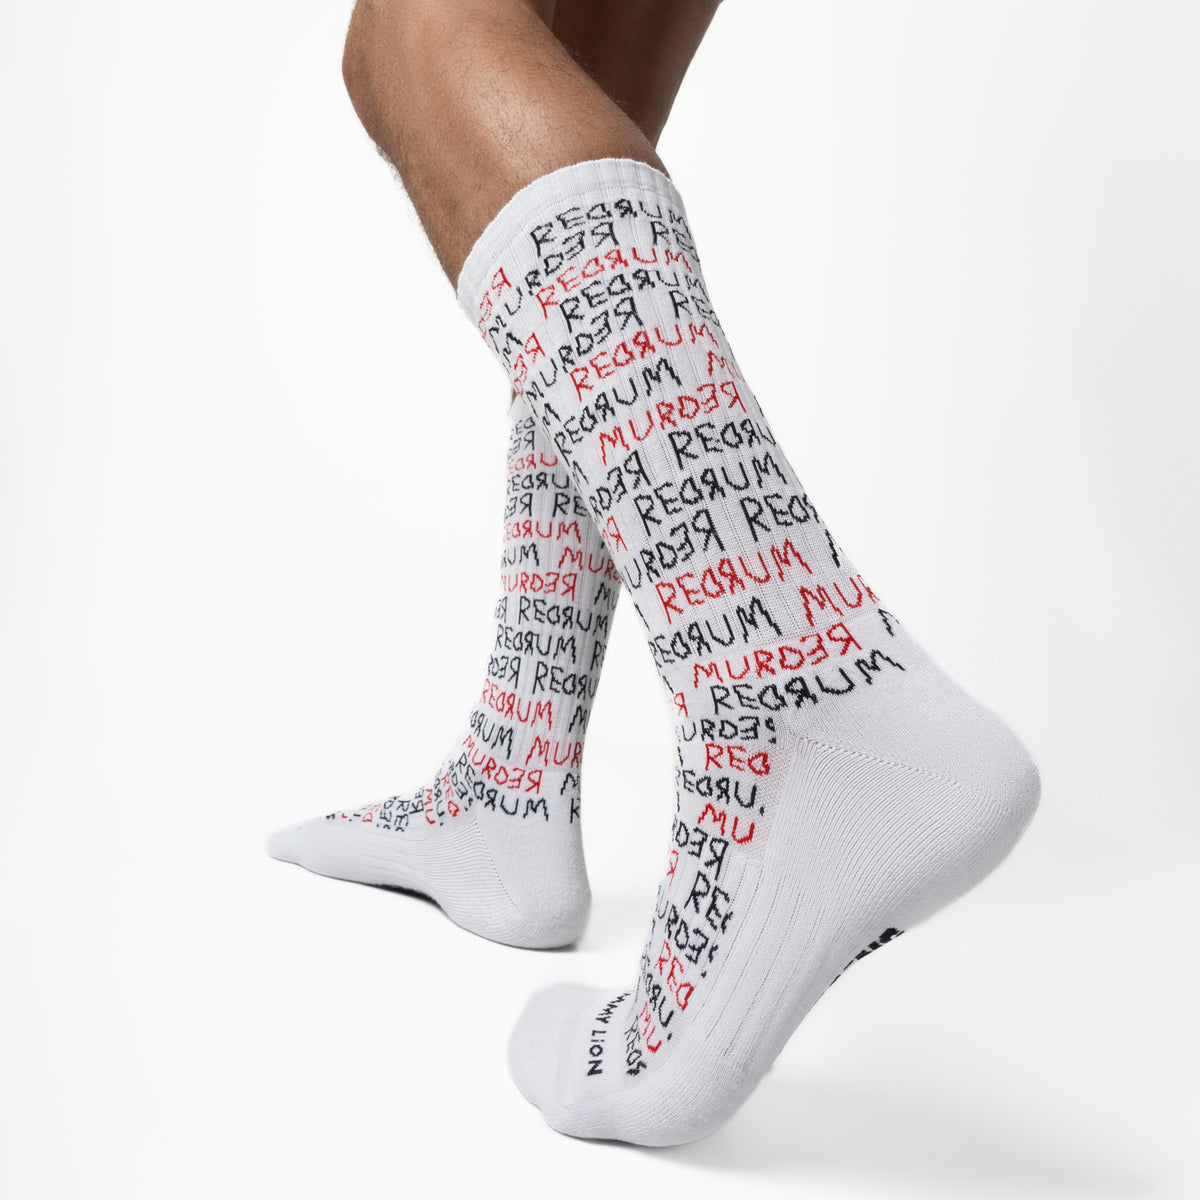 The Shining - REDRUM Athletic Socks - By Jimmy Lion